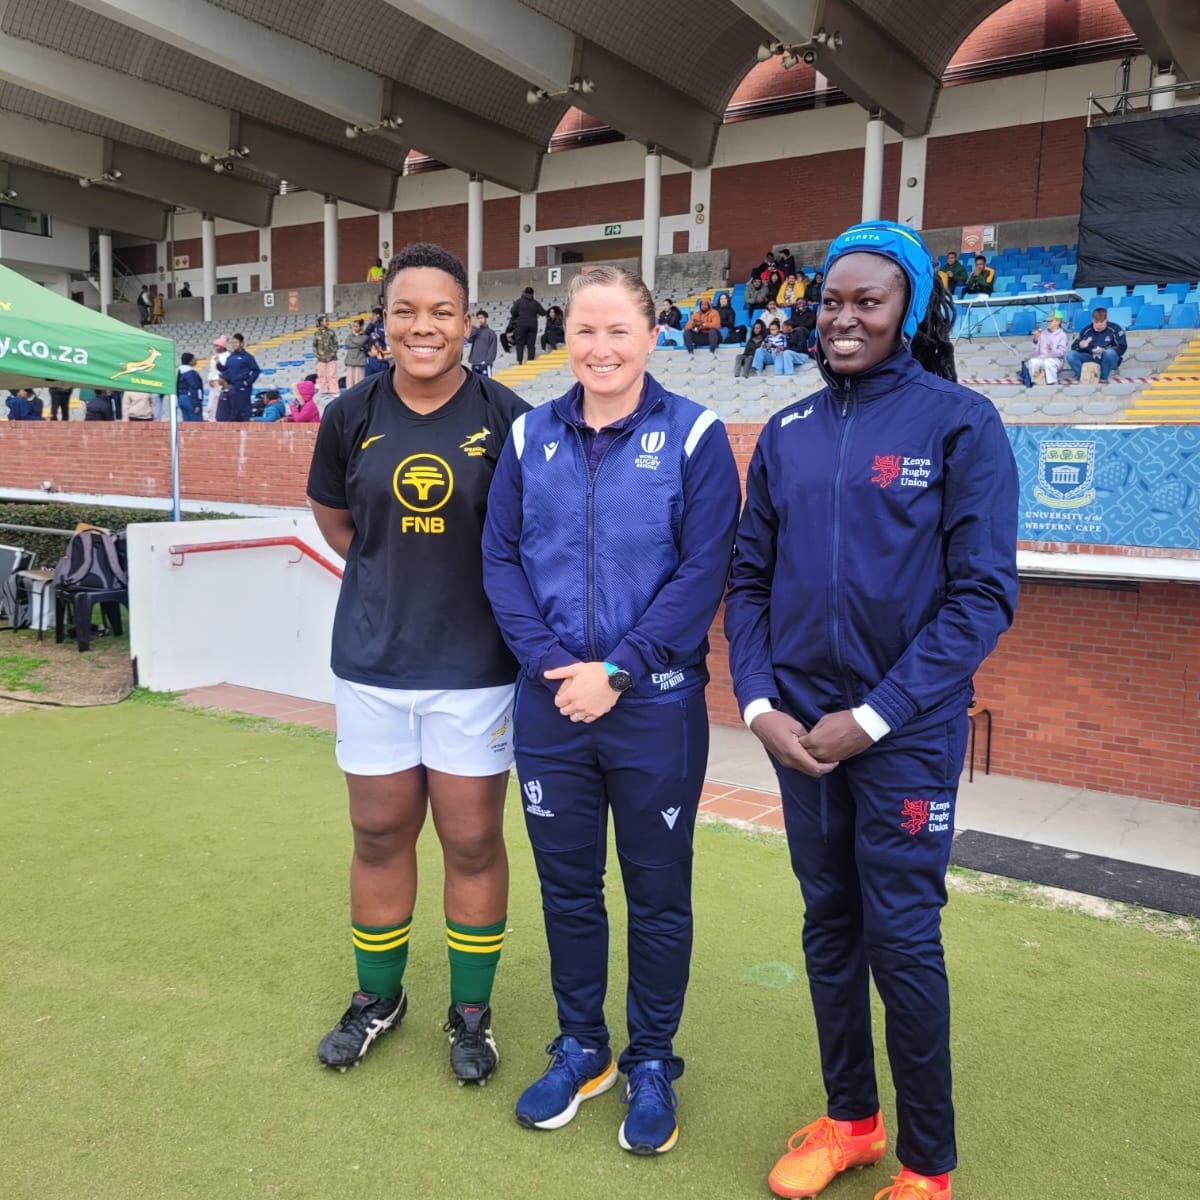 Coin toss done, @kenyalionesses to receive, #BokWomen to kick and play right to left in first half. @aimee.barrett.theron @babalwa_latsha @enidouma